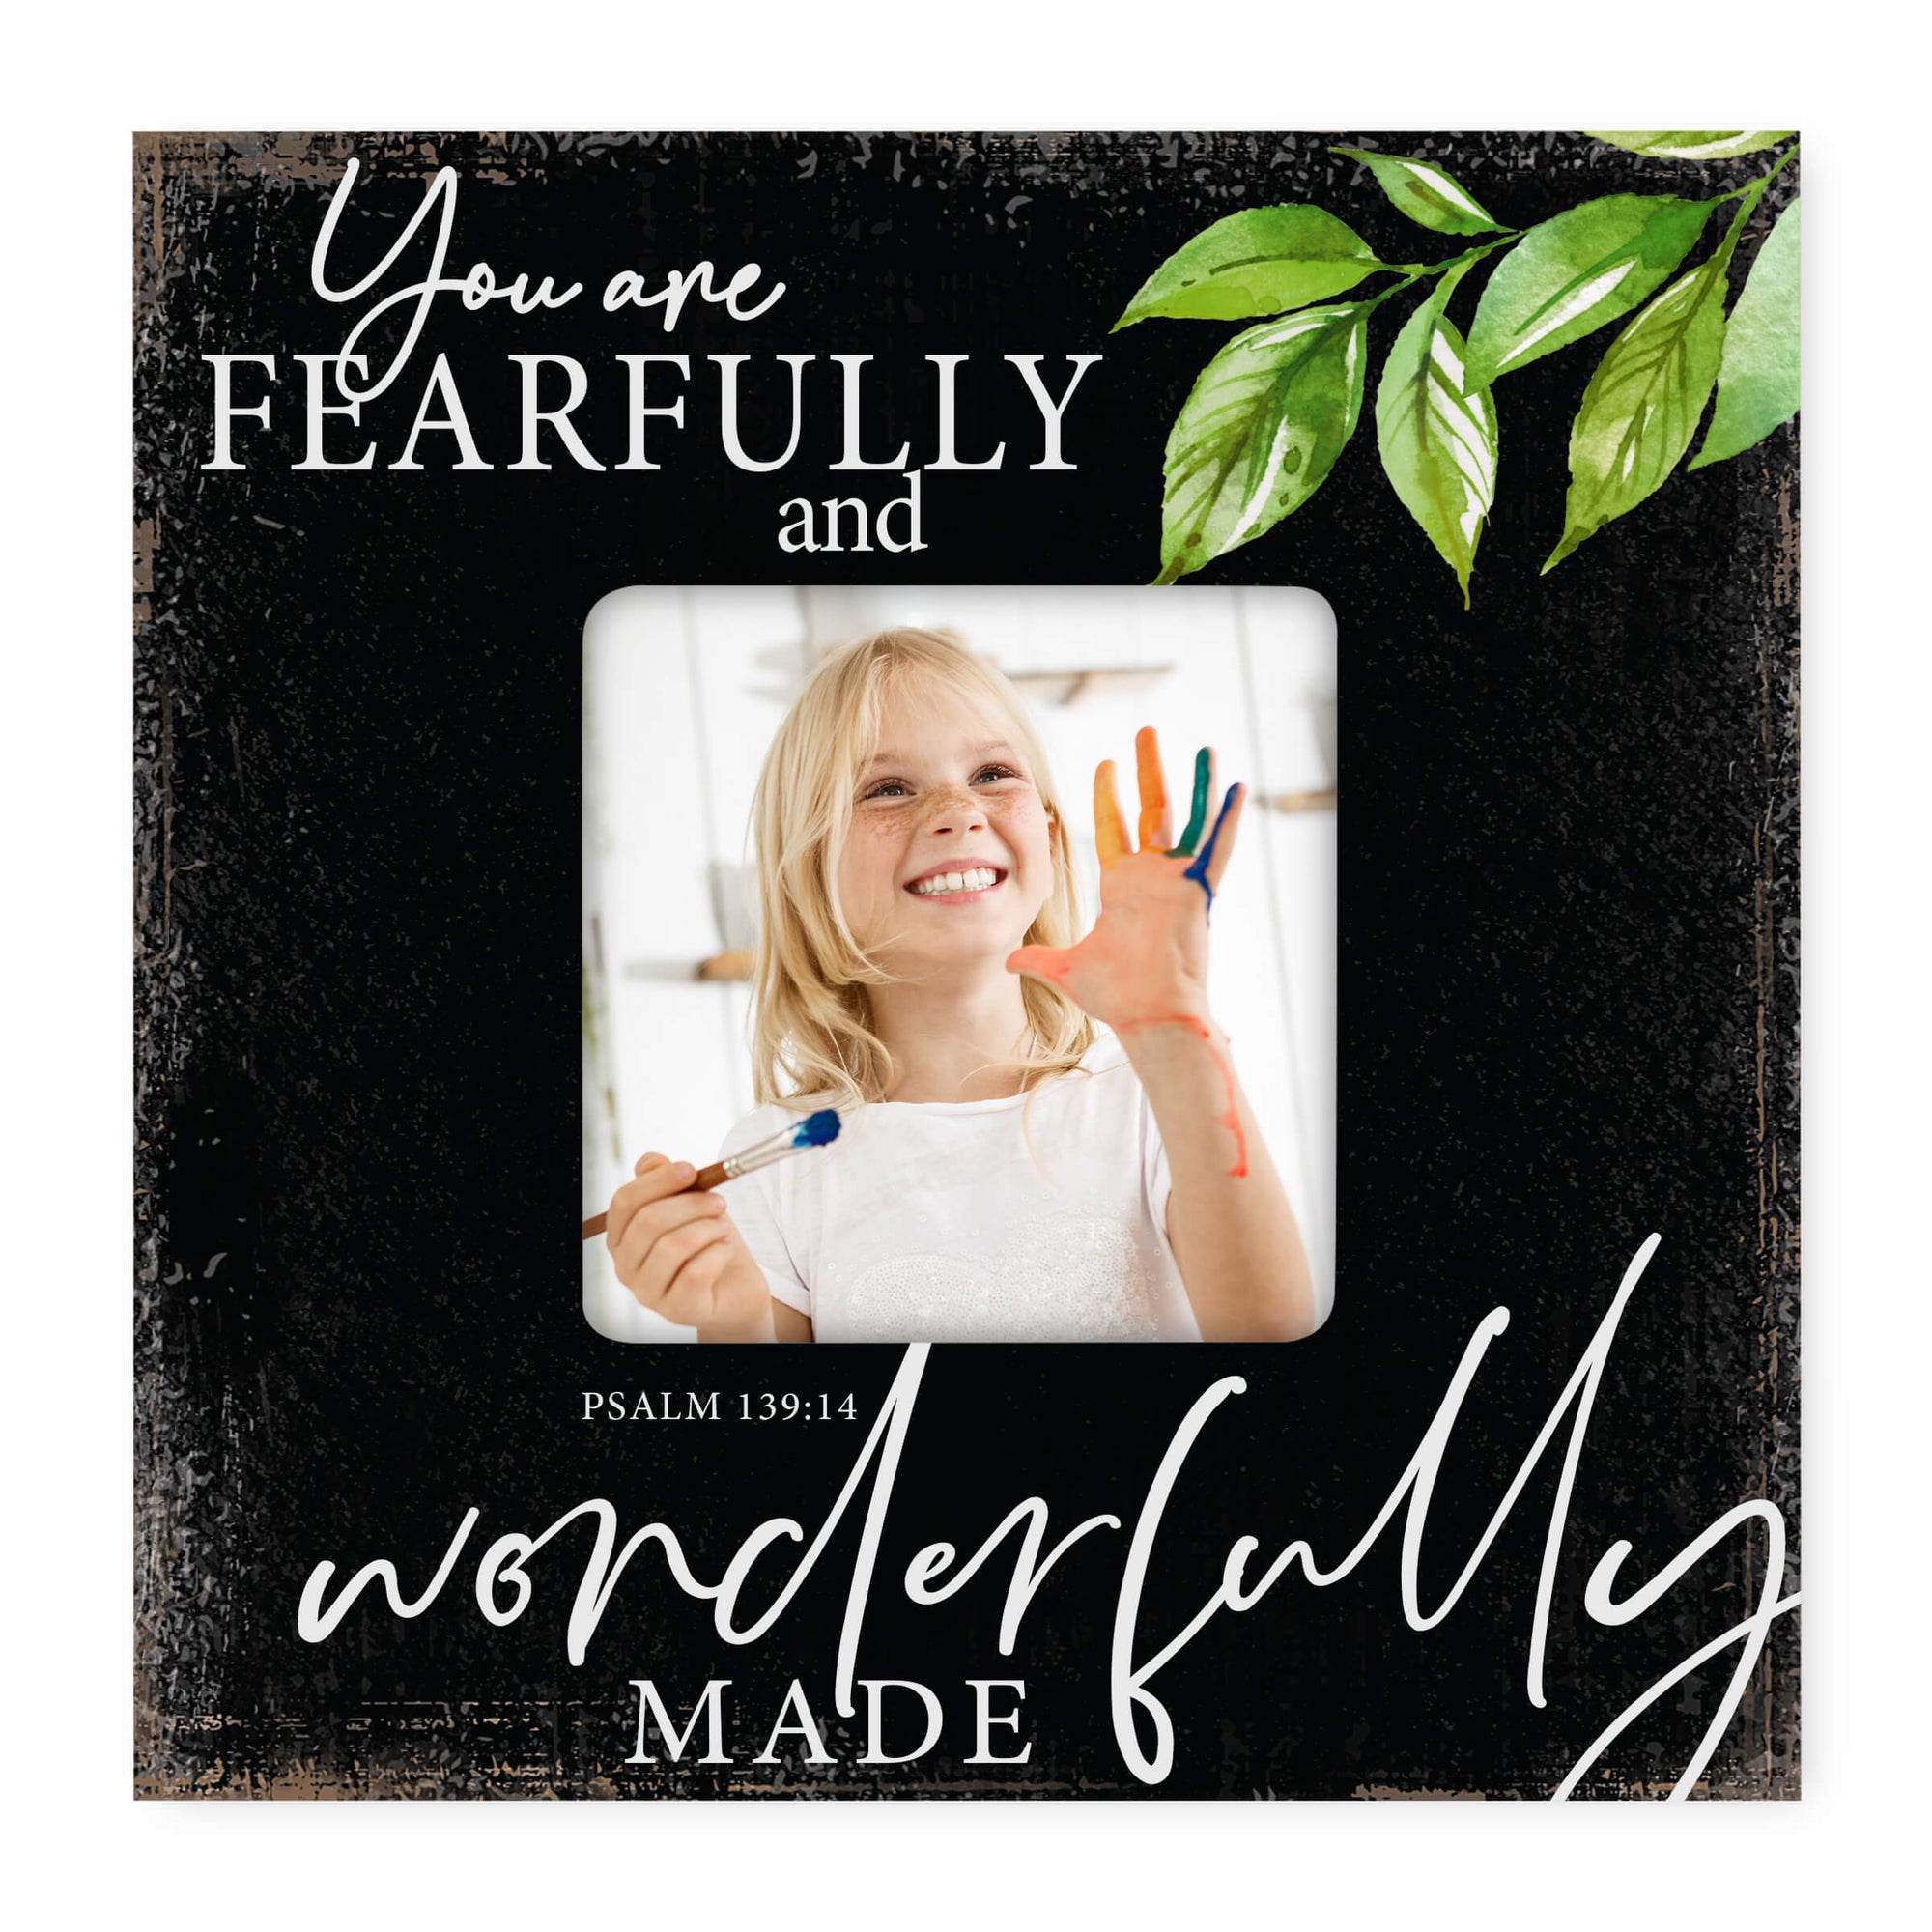 Wooden Fearfully and Wonderfully Picture Frame